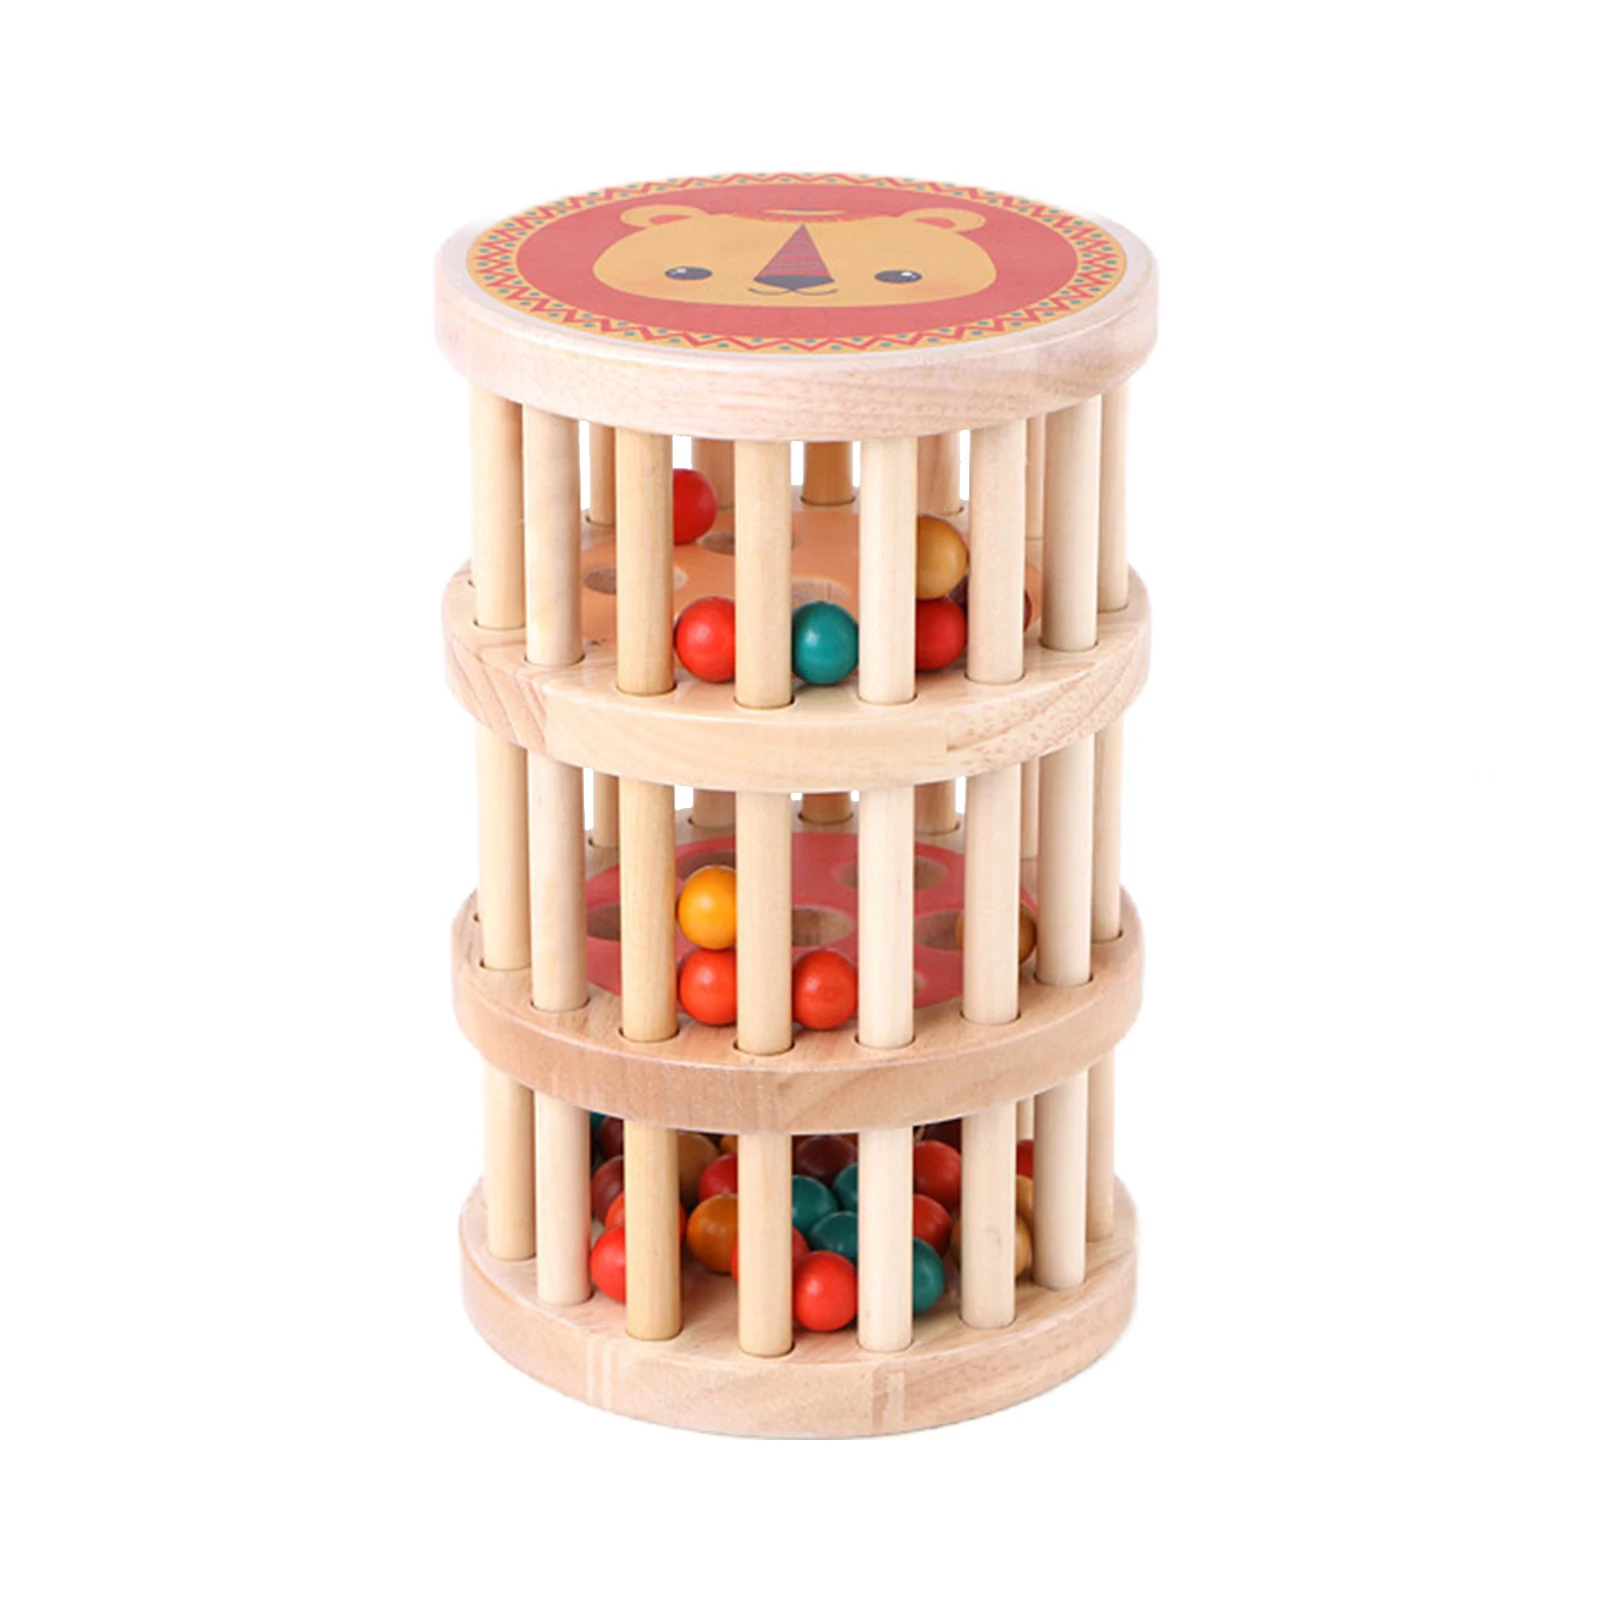 

Montessori Wooden Roller Rattle Toy With Balls 6-12 Months Babies Infants Cylinder Roller Rolling Drum Toy For Auditory Training